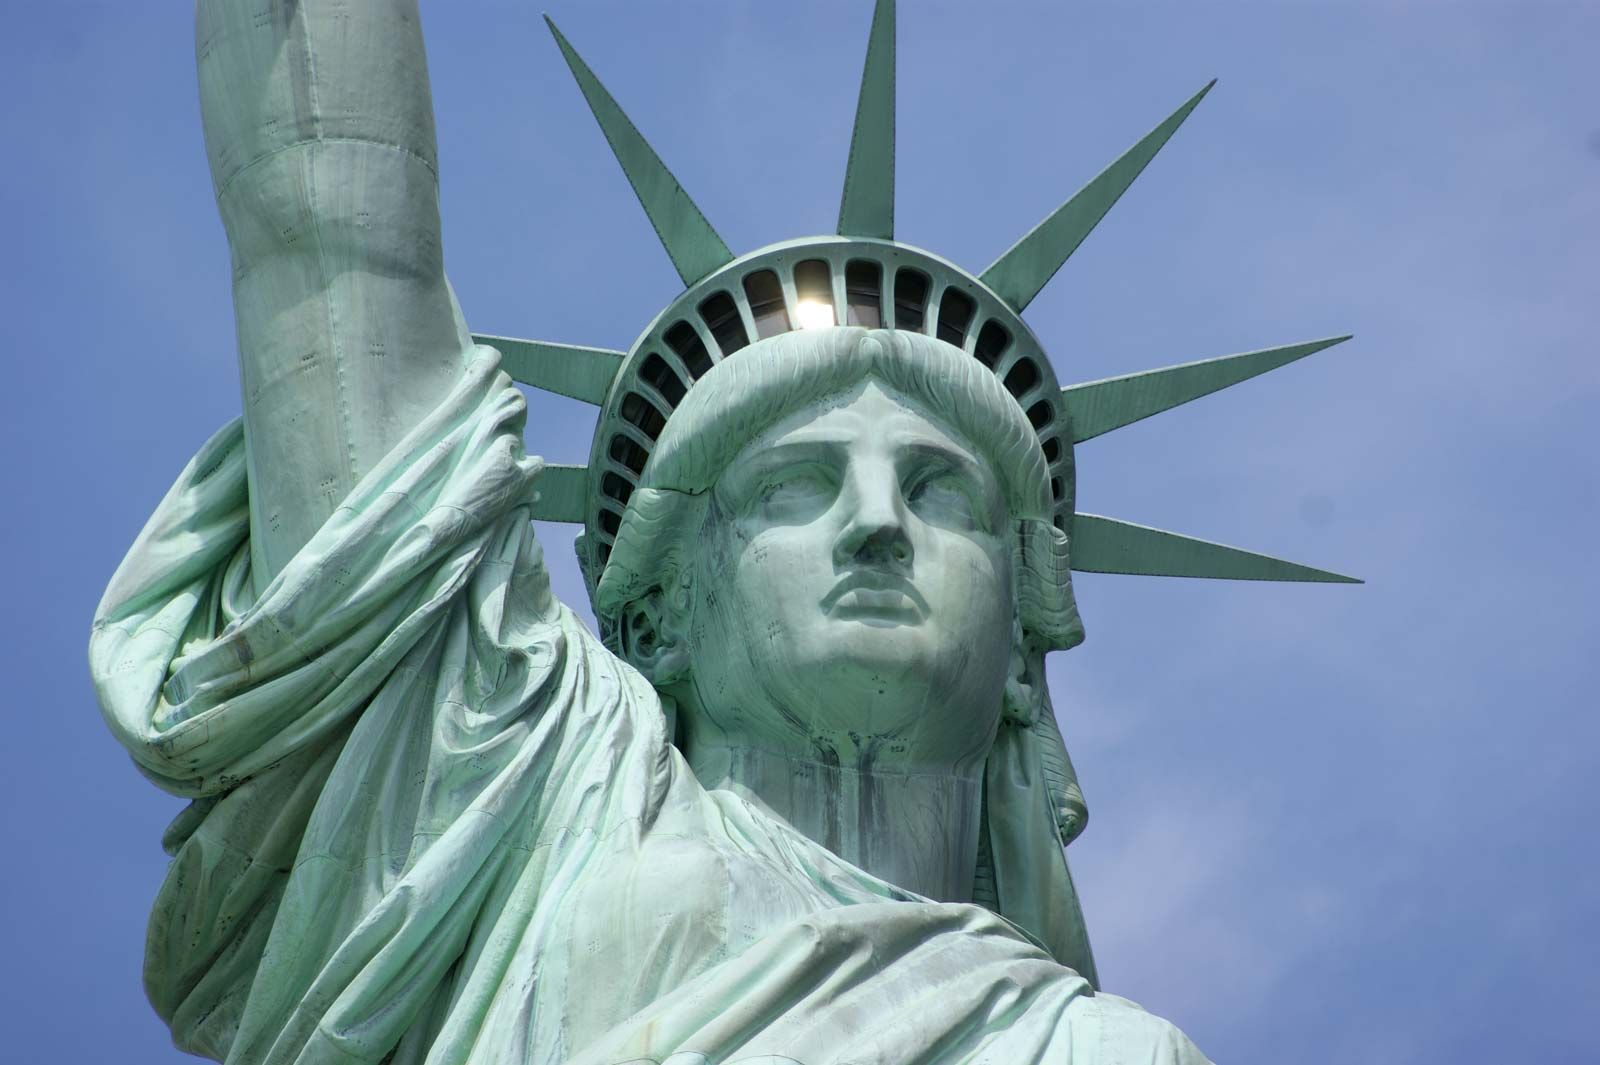 why is the statue of liberty green in color